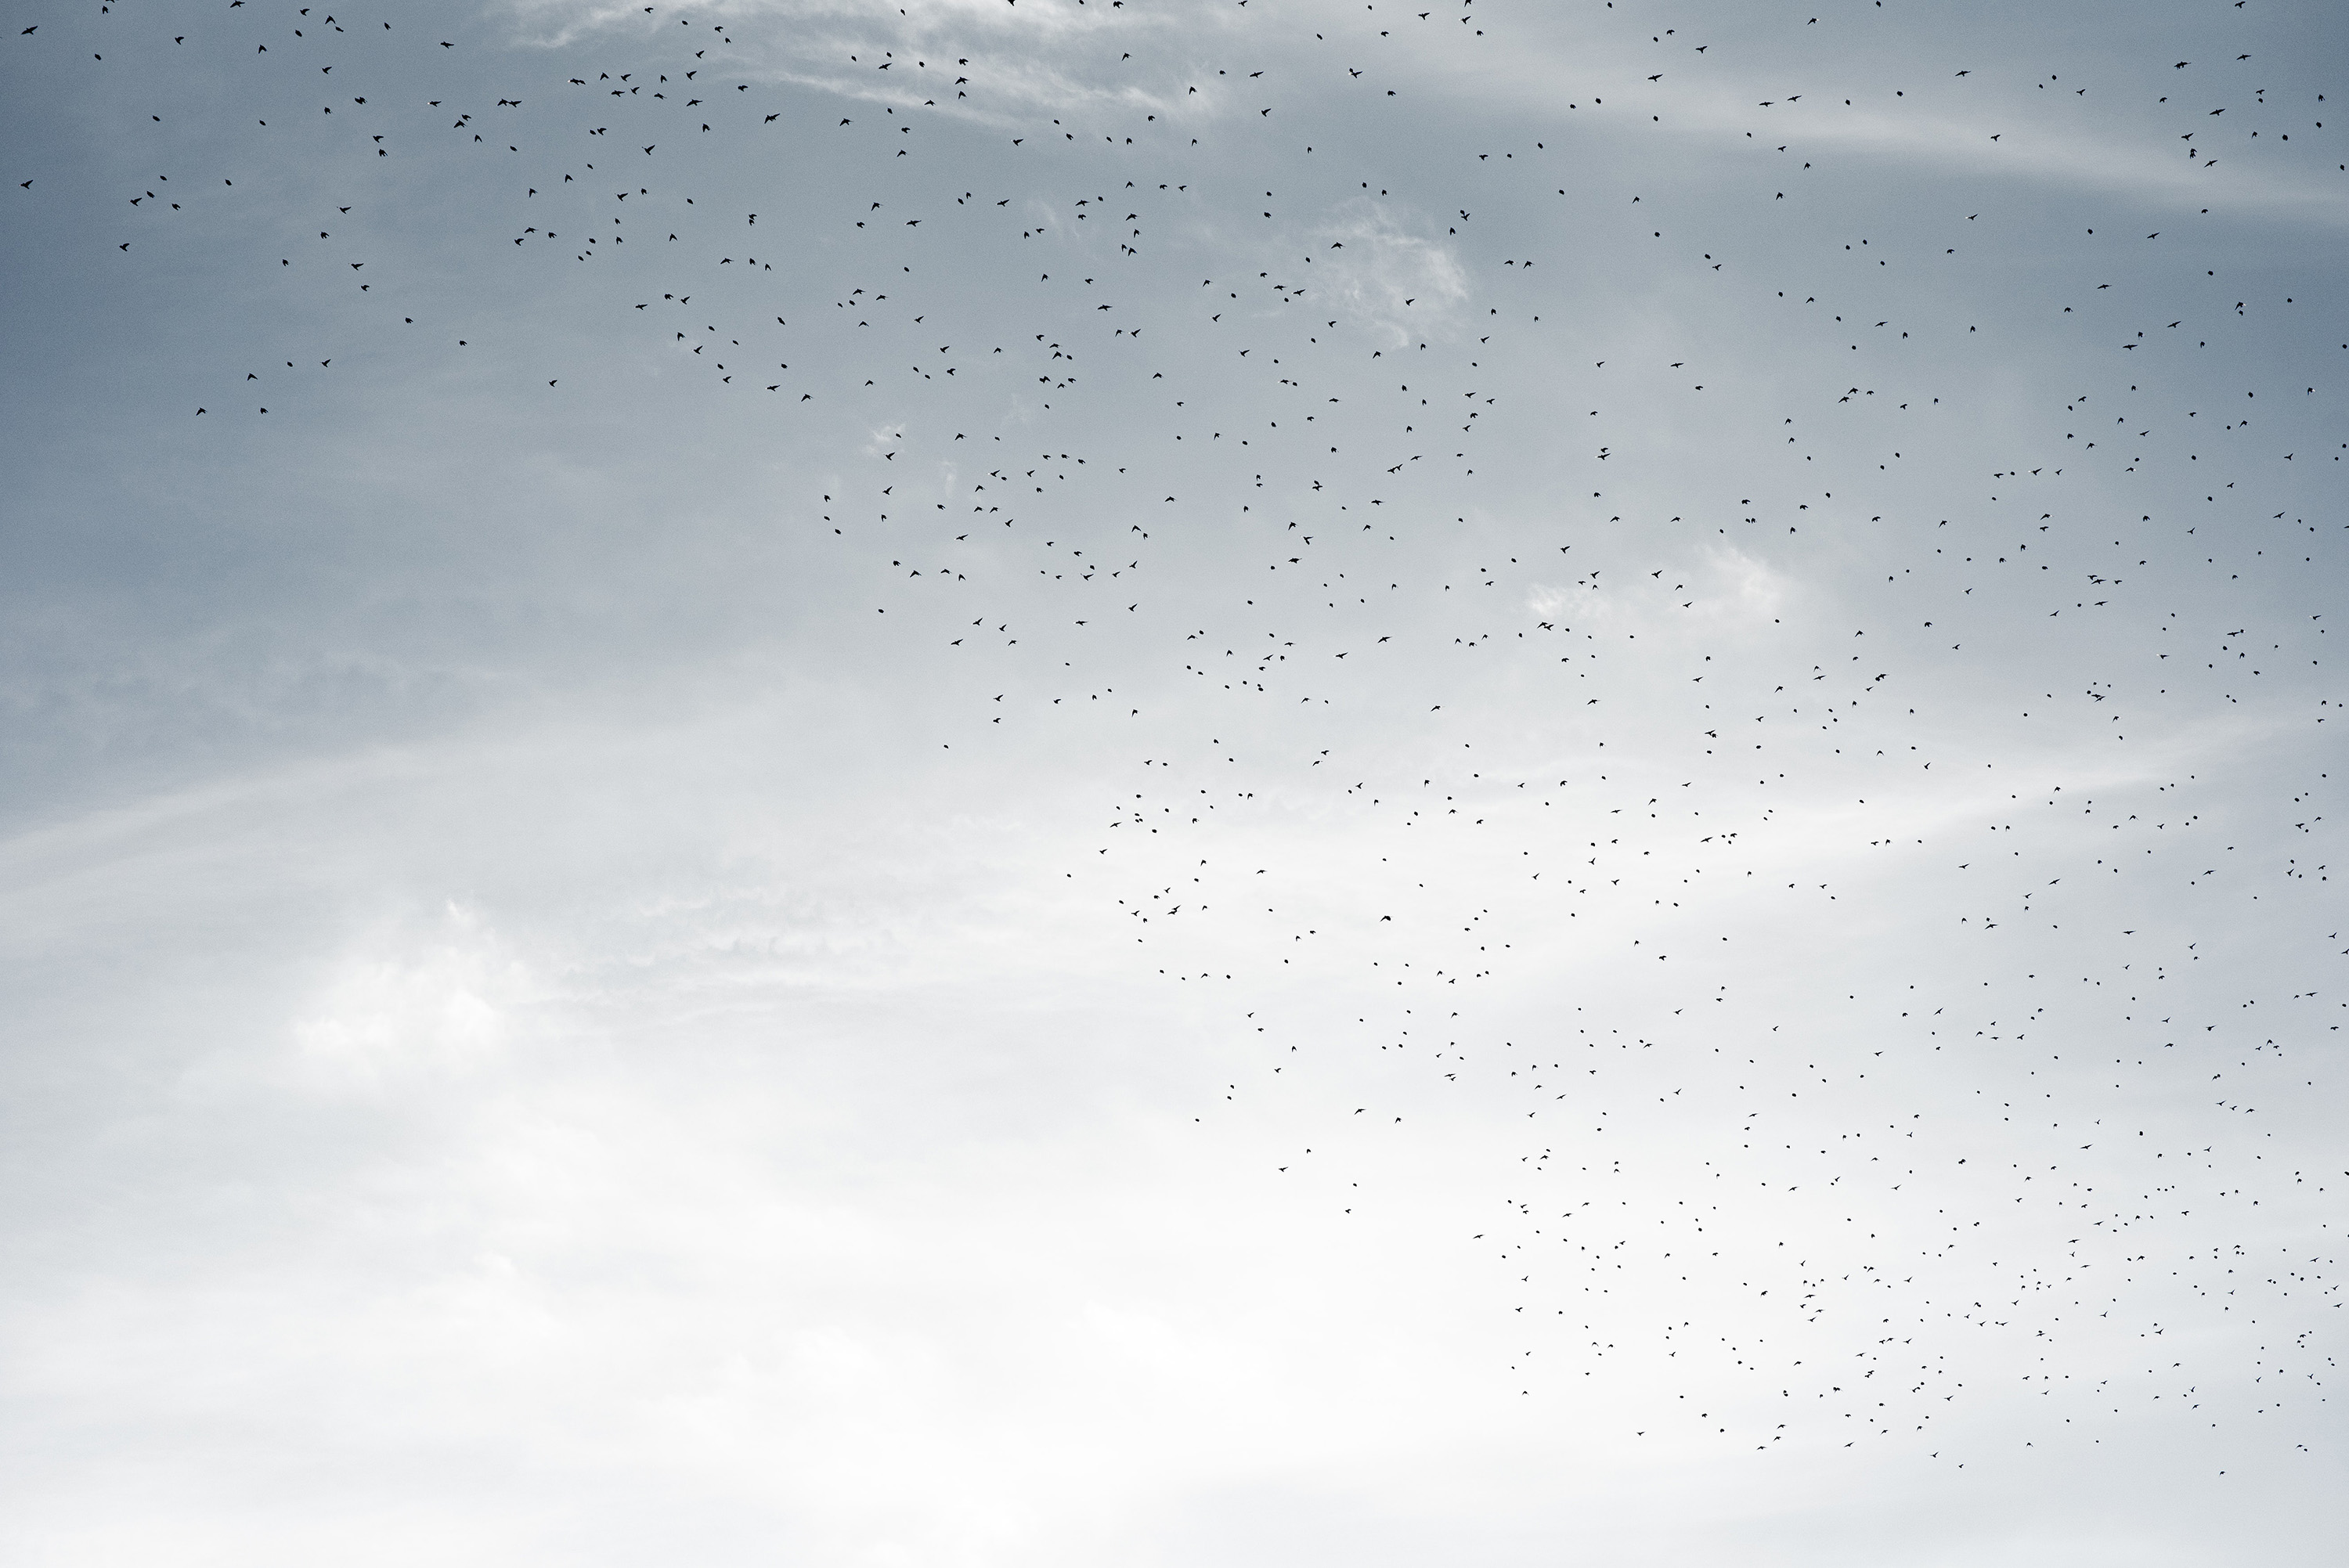 A flock of birds flying in a cloudy sky. The birds are scattered, with no particular formation, giving a sense of freedom and movement.